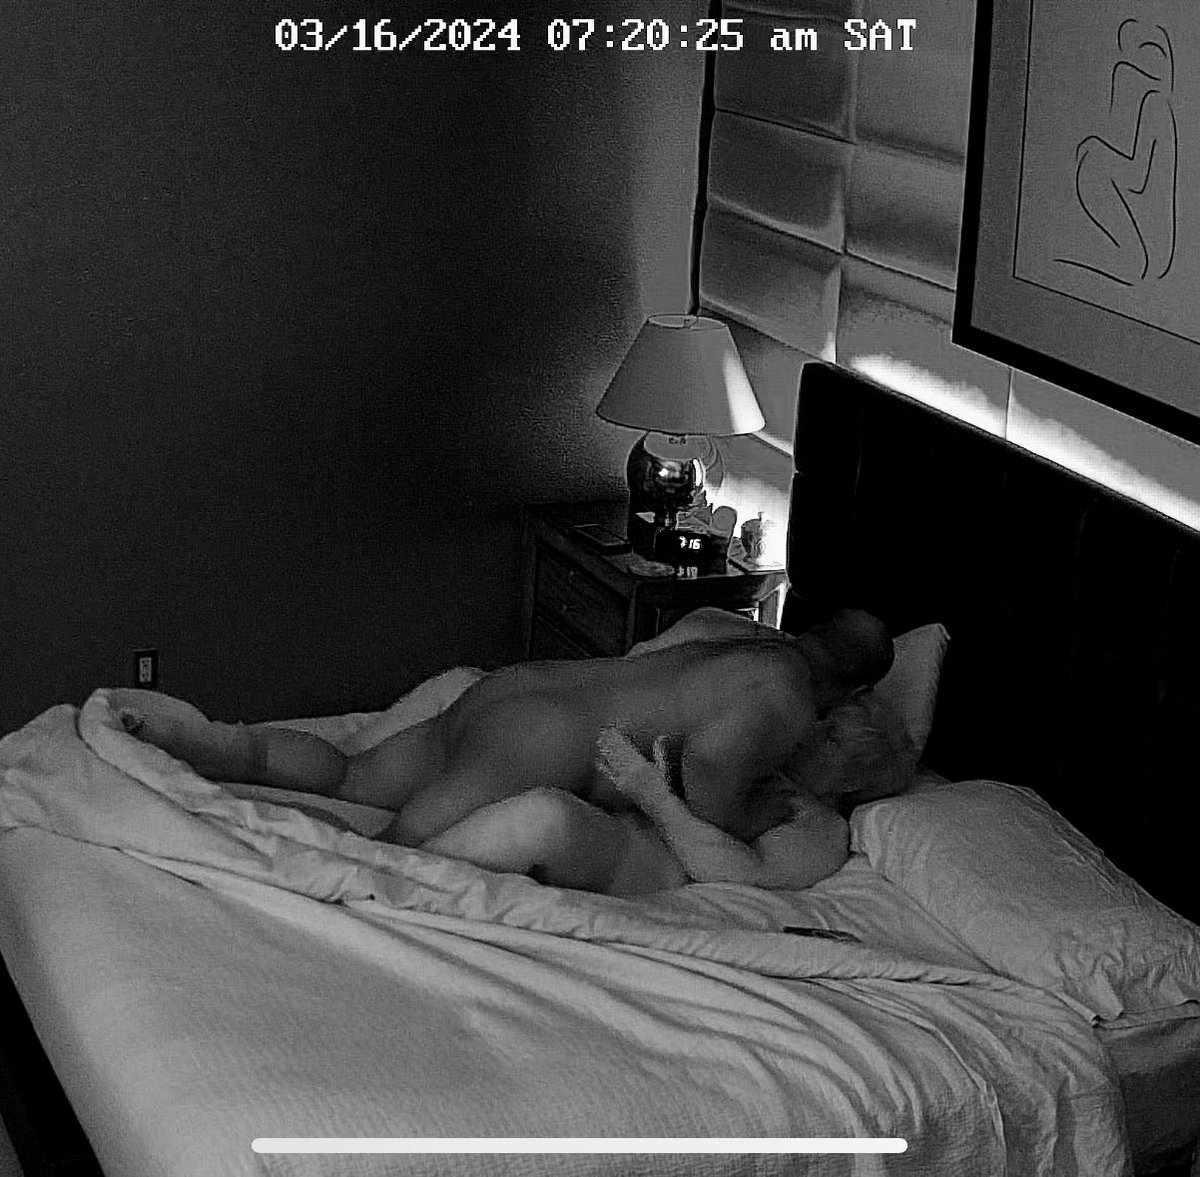 I just looked on the bedroom security cam. @MrsTex3 seems to be enjoying her private morning in bed with her married #BlackBull!! #BBCslut